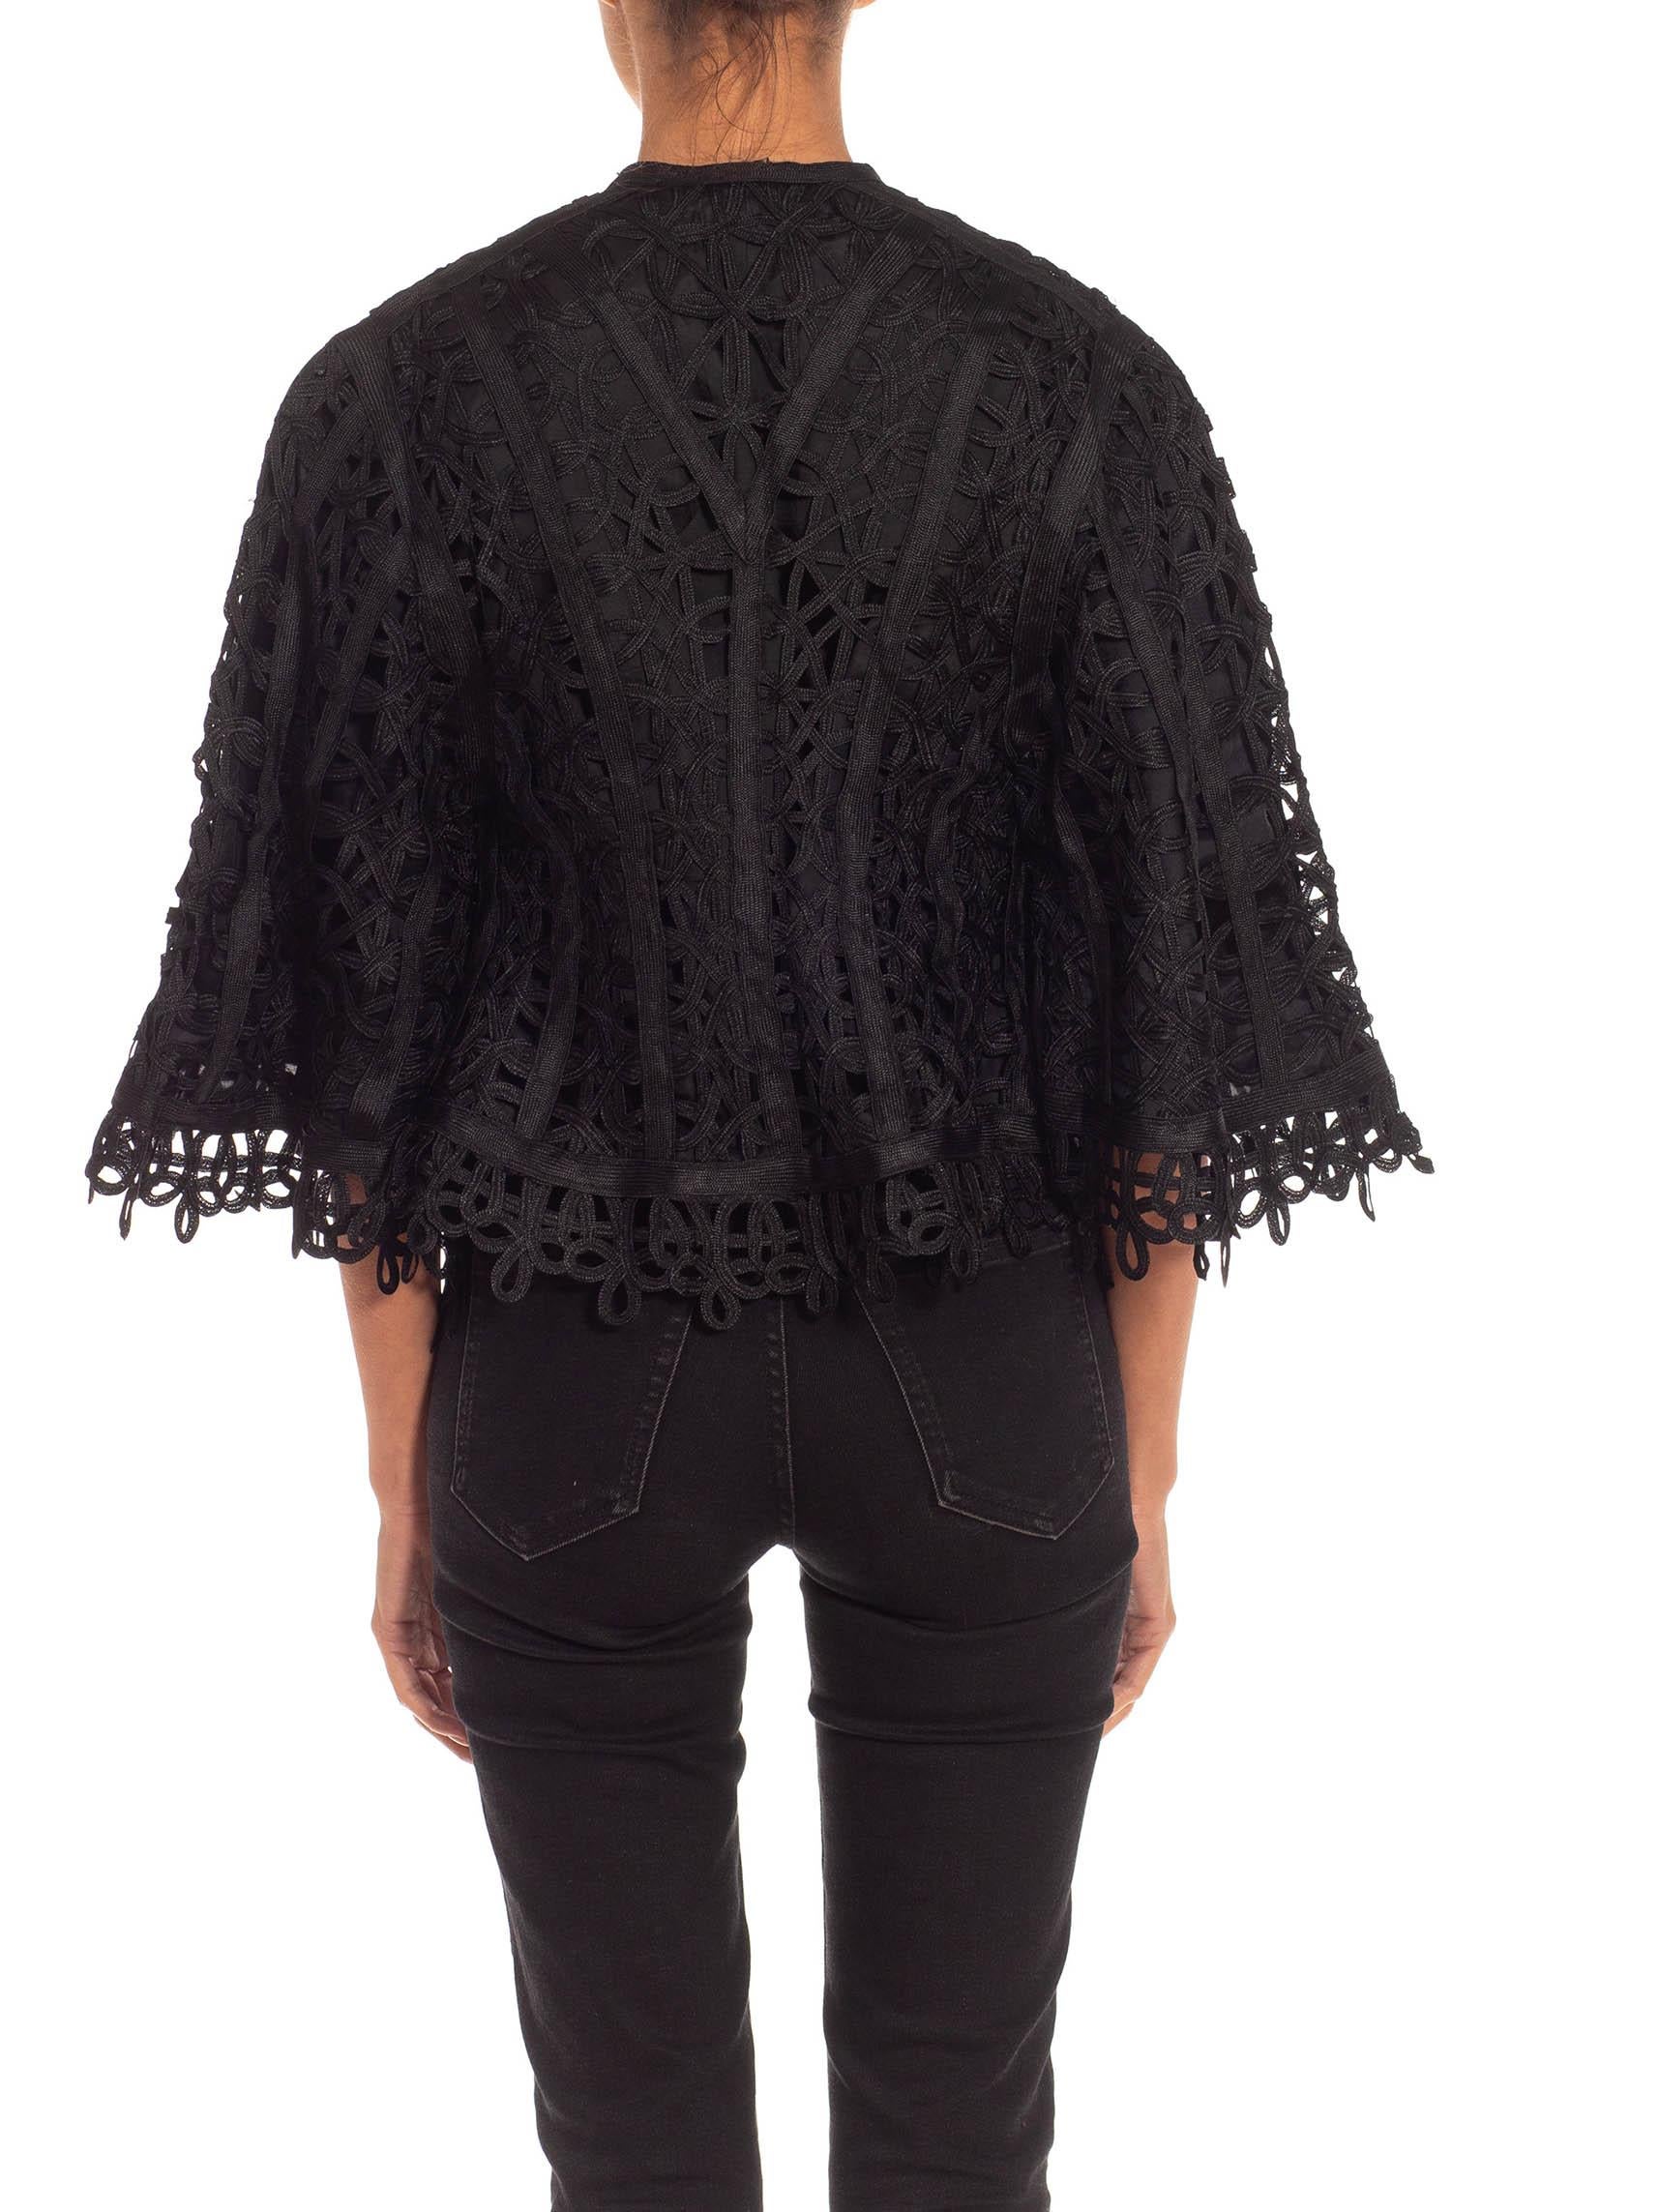 Victorian Black Silk Tape Lace Short Jacket With 3 Quarter Sleeves For Sale 6